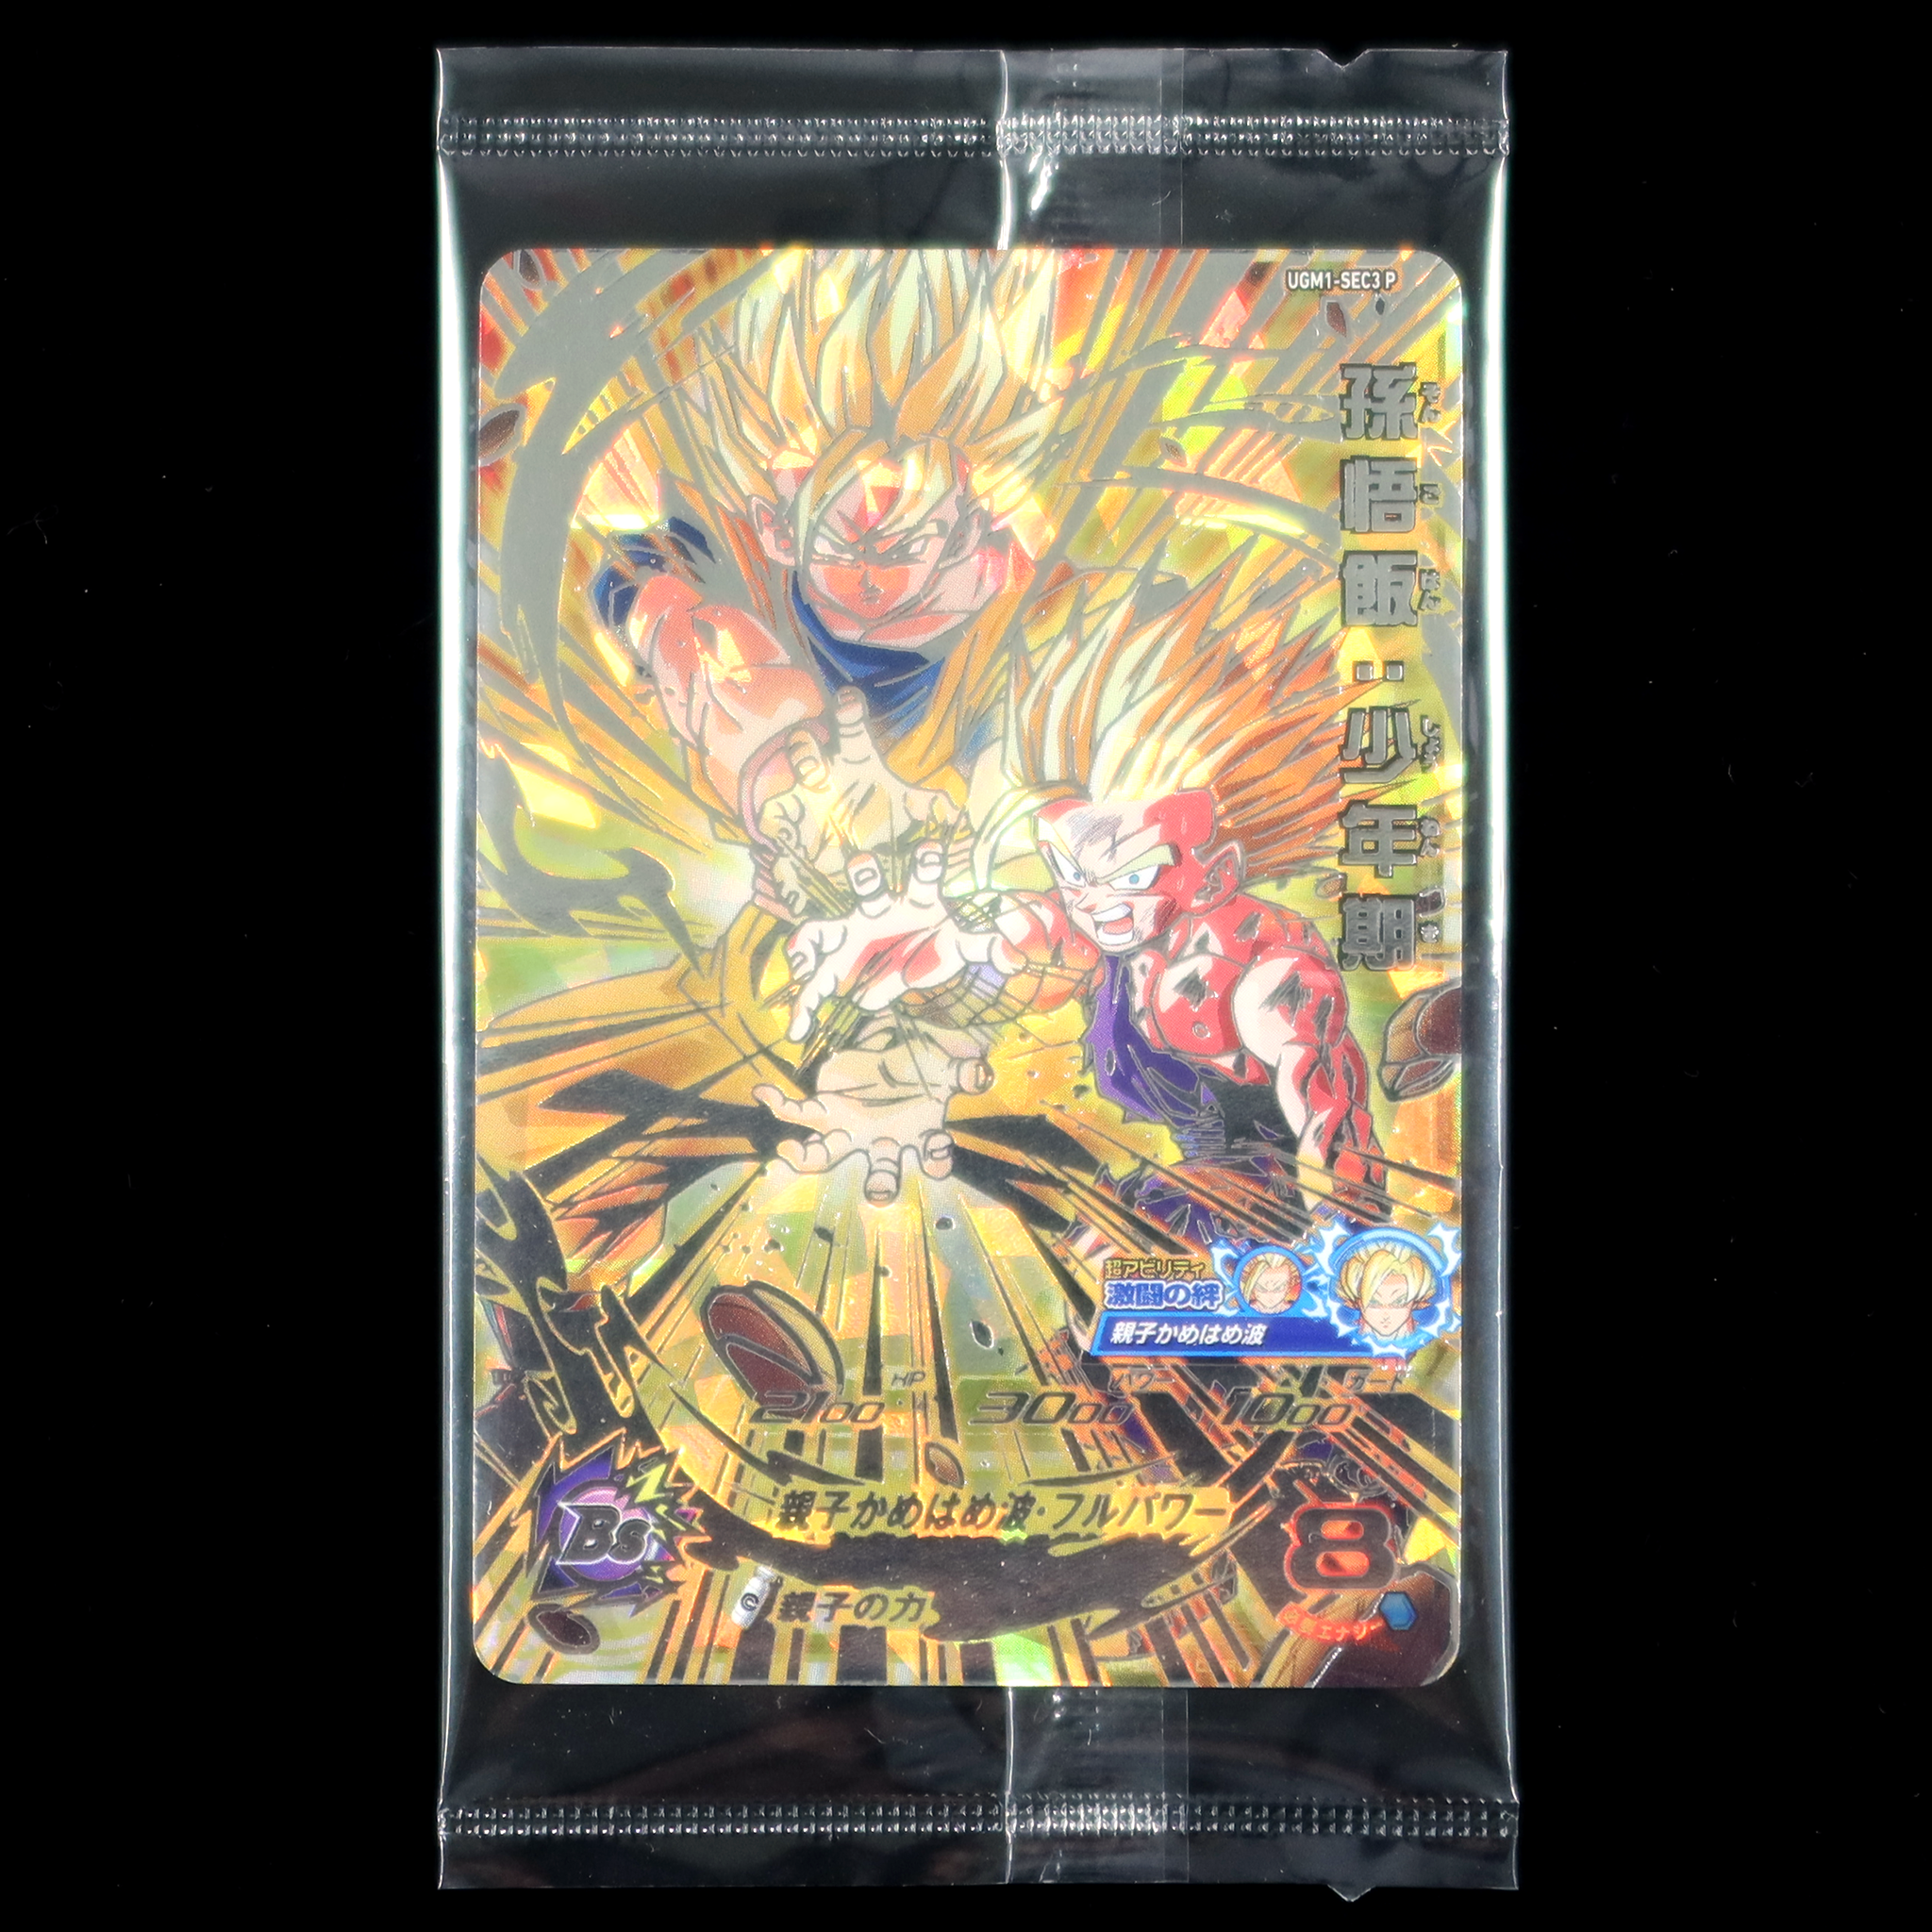 SUPER DRAGON BALL HEROES UGM1-SEC3 P in blister